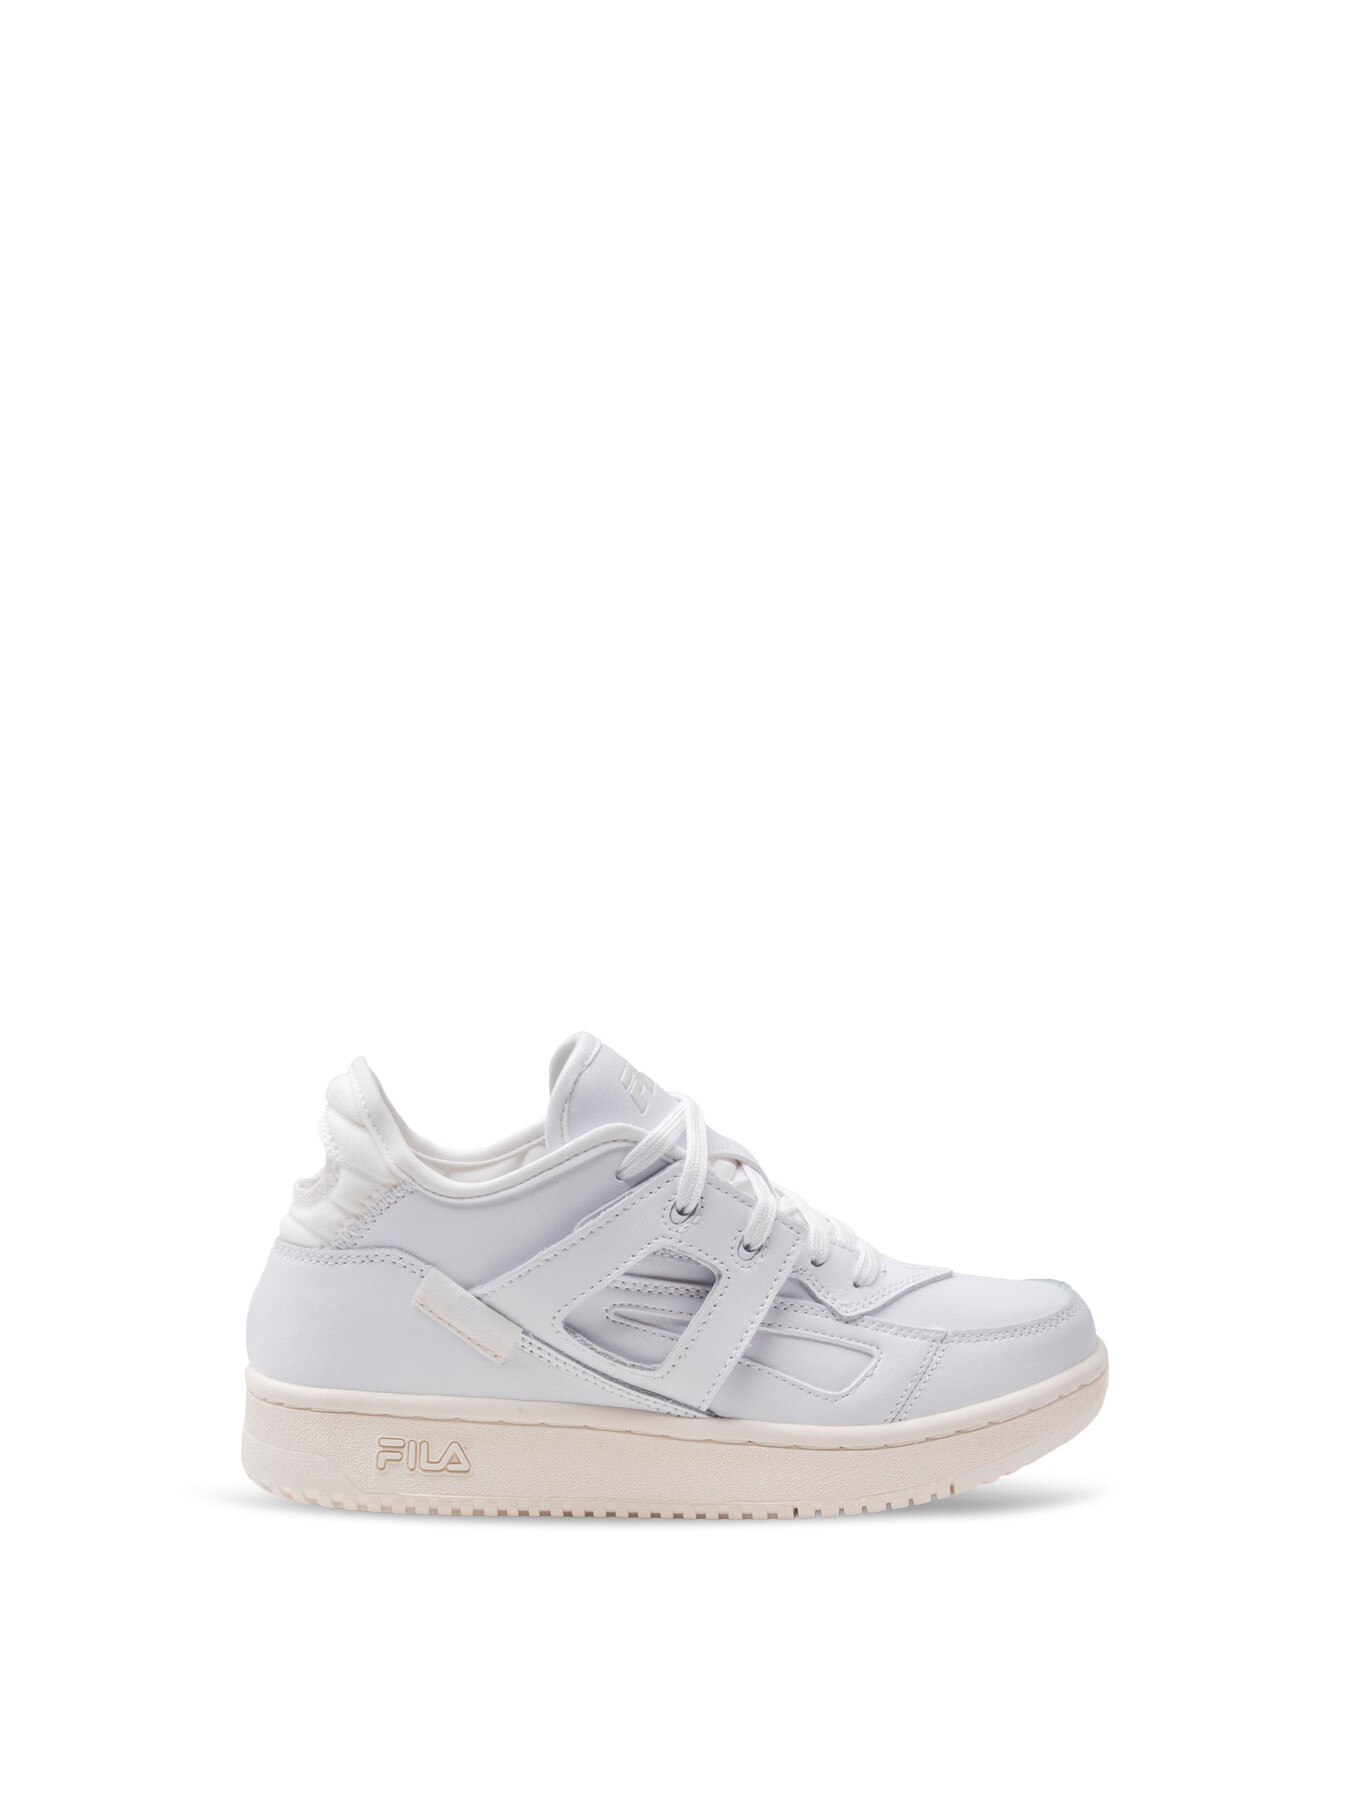 Fila Cage Low Trainers White